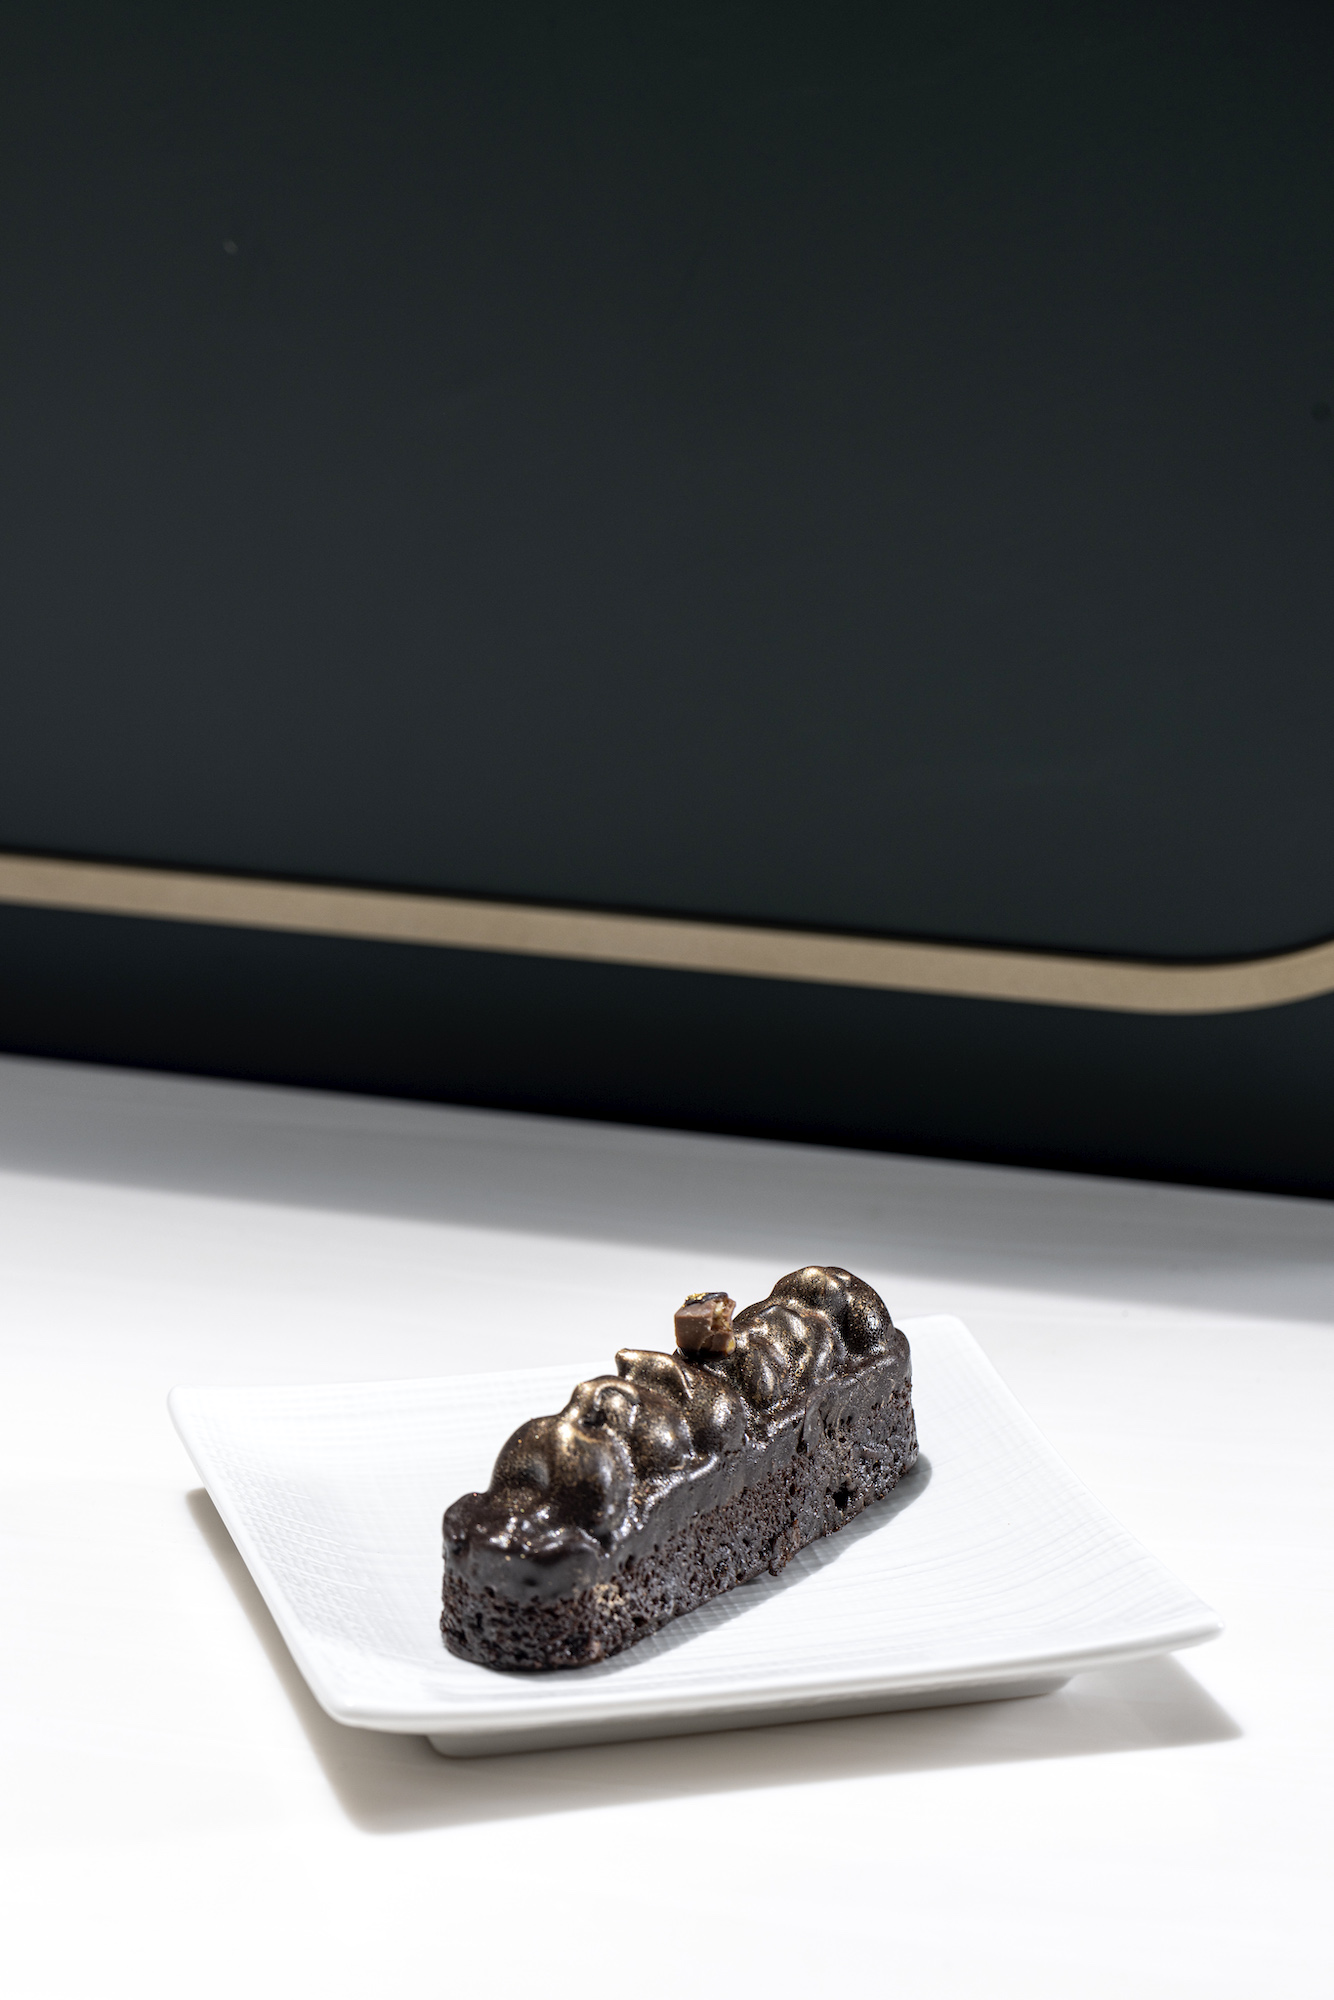 Tablea Nut Brittle is made with tablea chocolate sponge, salted caramel nut brittle, and tablea chocolate cremeux